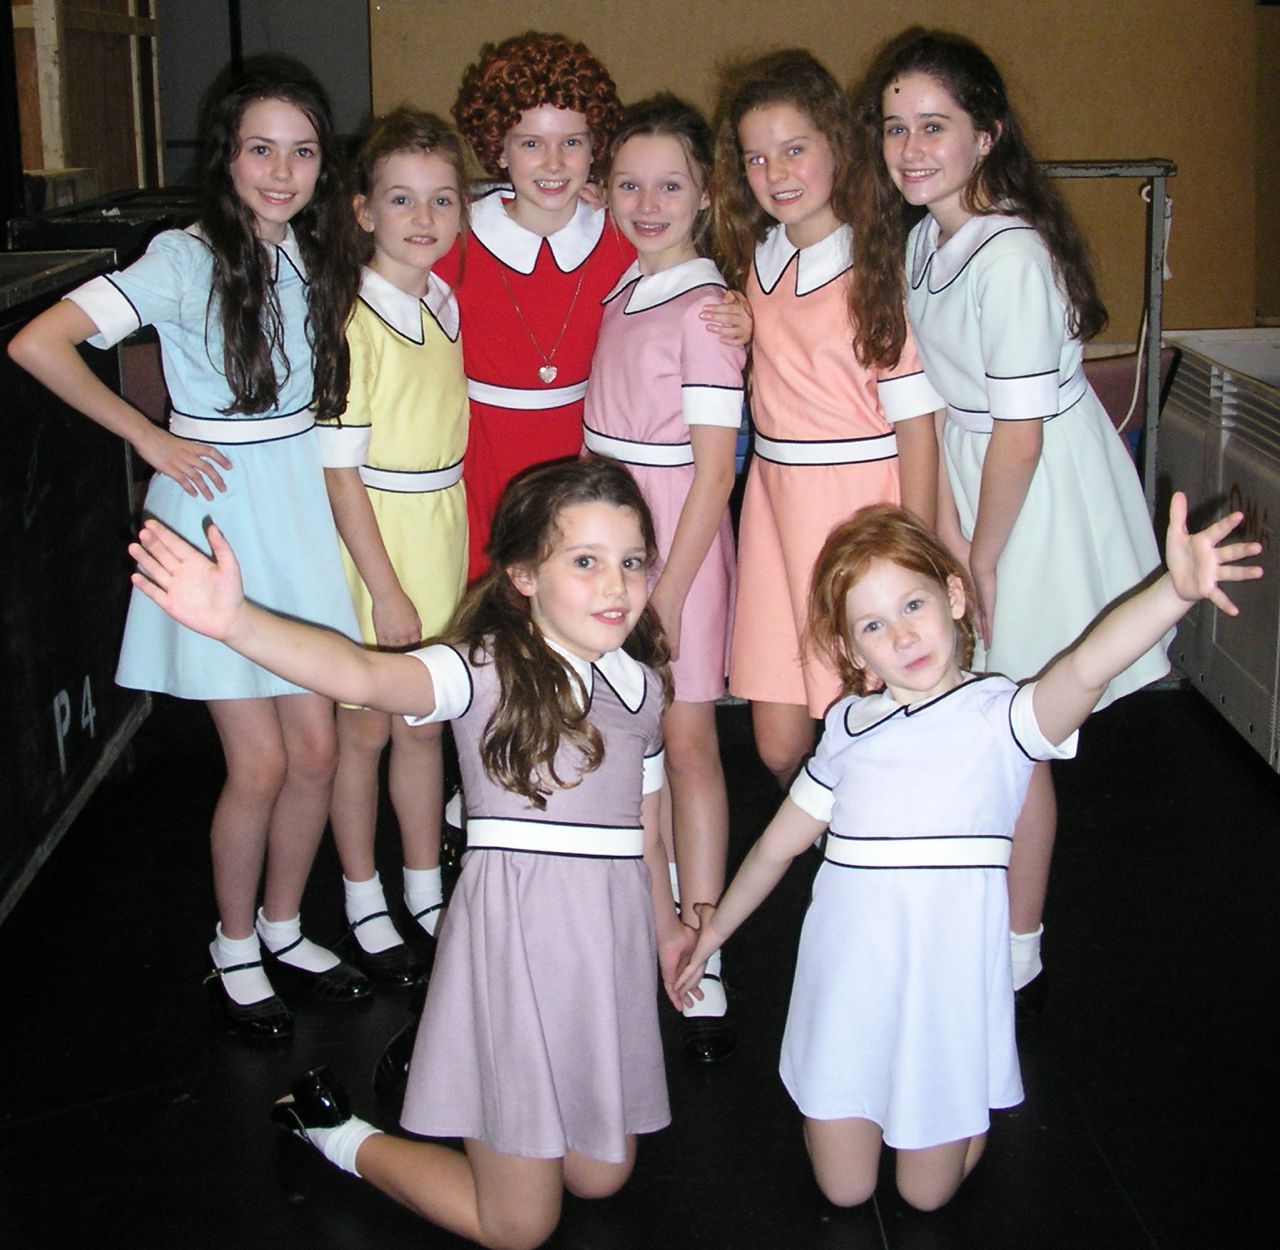 Sophie was an orphan in Annie the Musical Australia which played at QPAC in Brisbane in 2012. It starred Anthony Warlow, Nancye Hayes, Todd McKenney and Alan Jones.